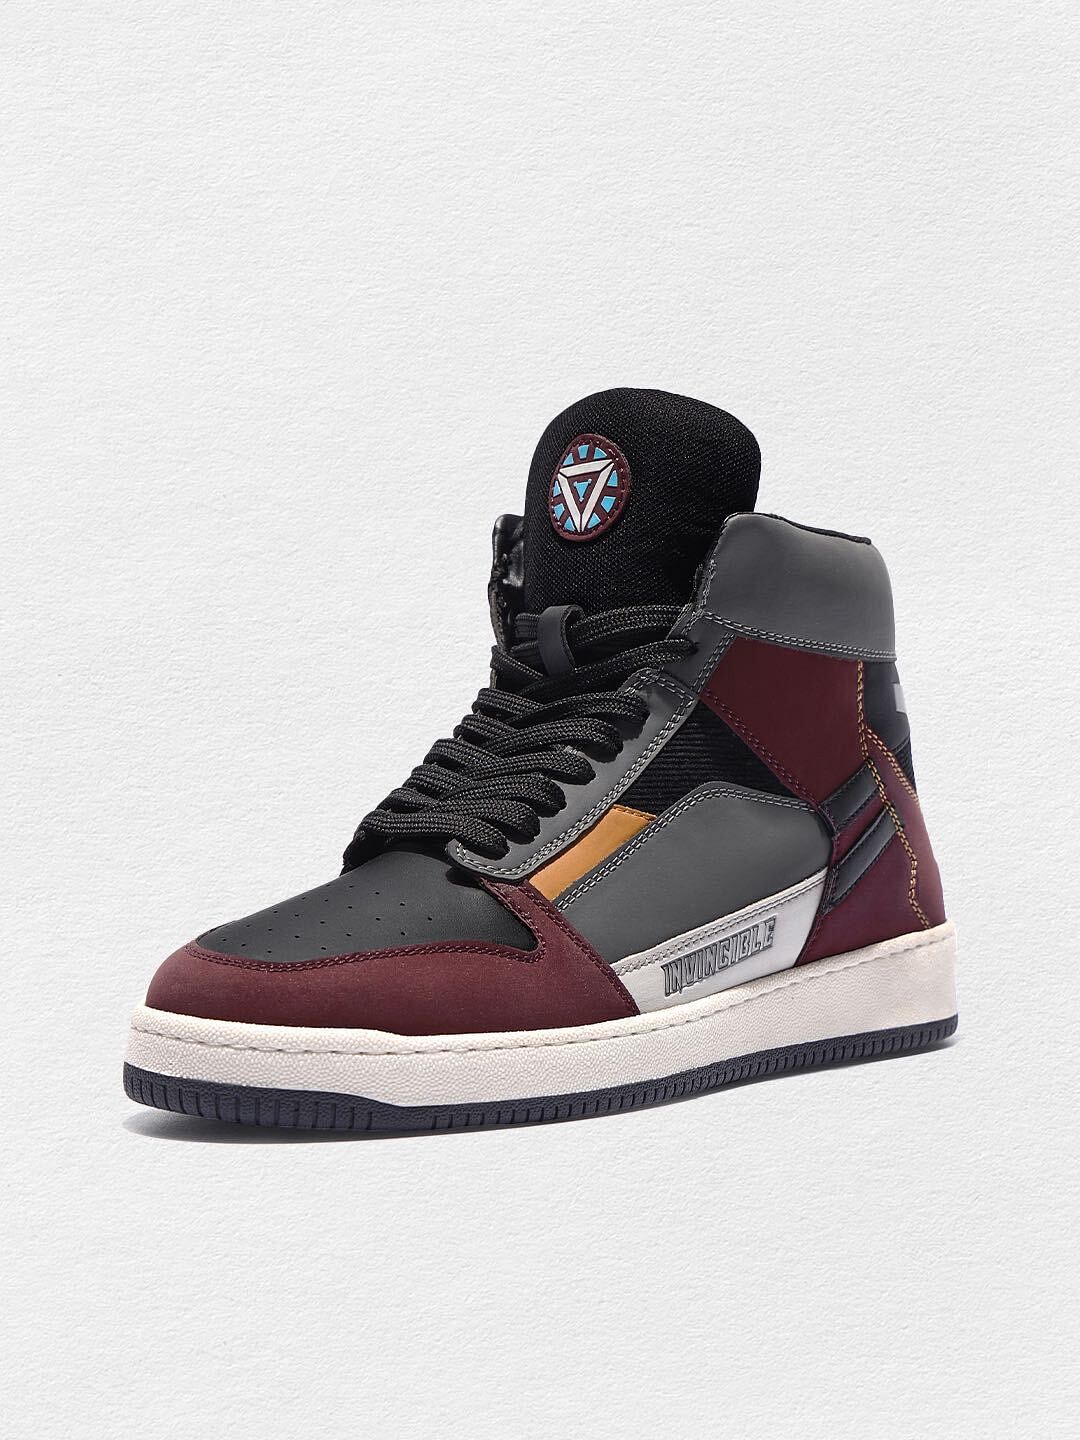 Iron Man: Armoured Avenger Men High Top Sneakers at The Souled Store